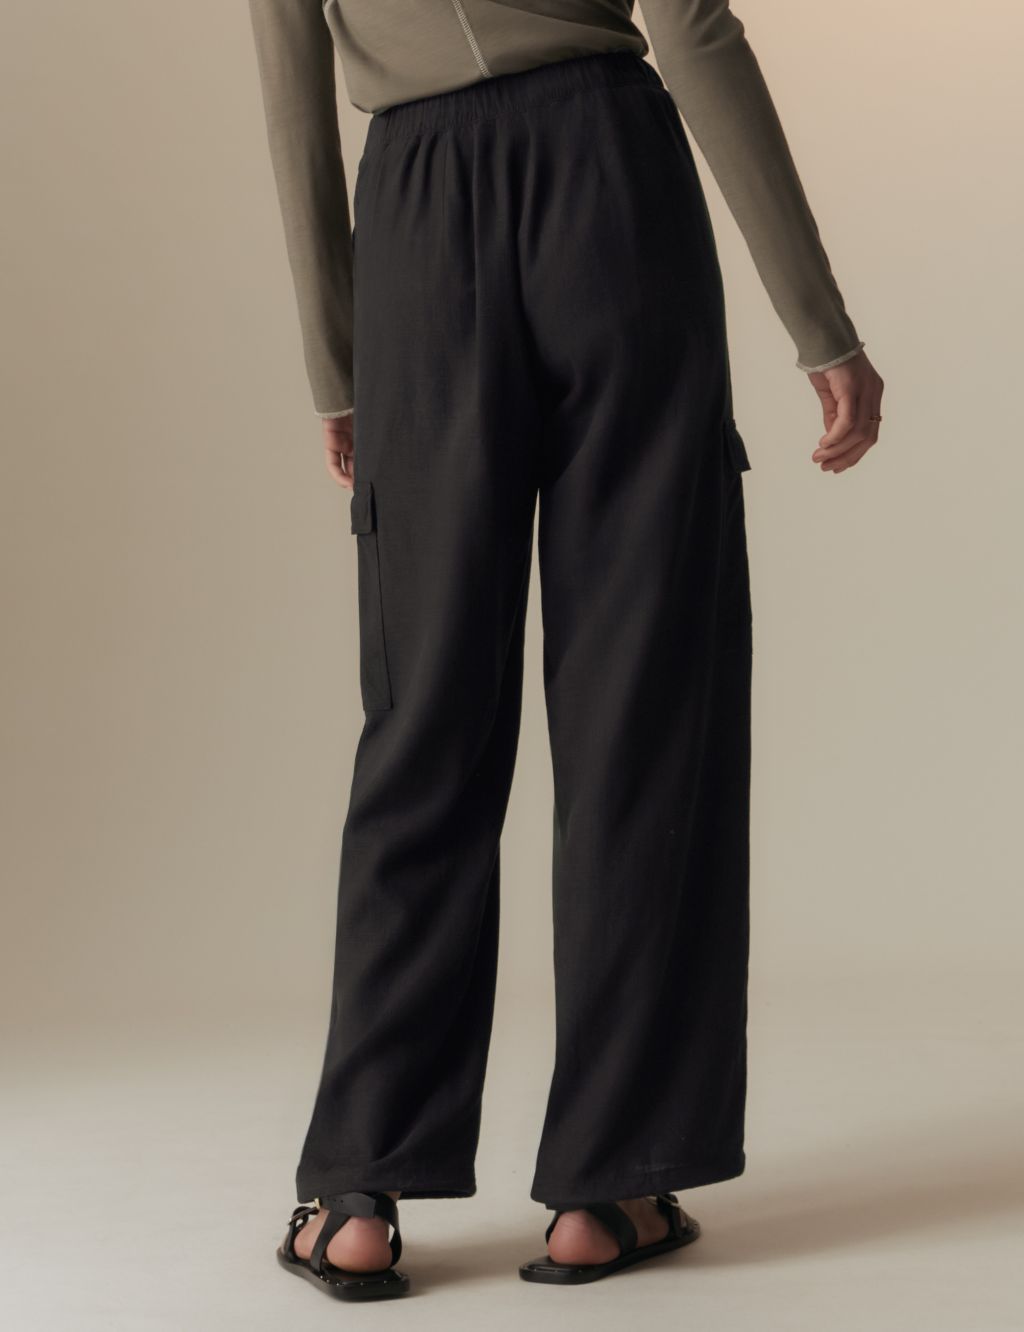 Soft Surroundings Cargo Athletic Pants for Women